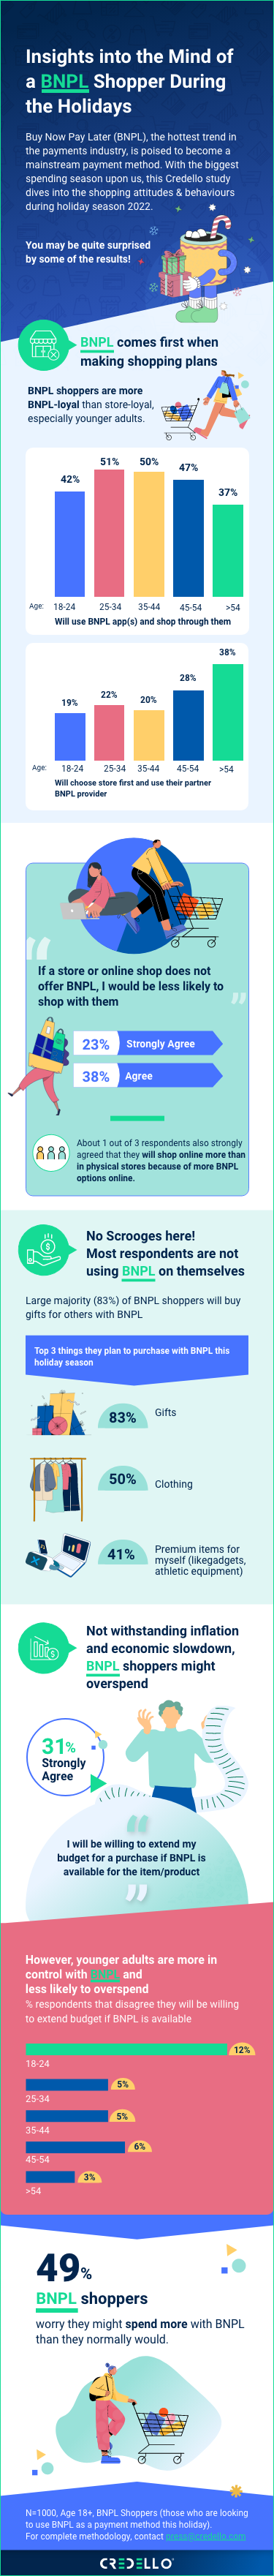 BNPL Shoppers Have No Store Loyalty